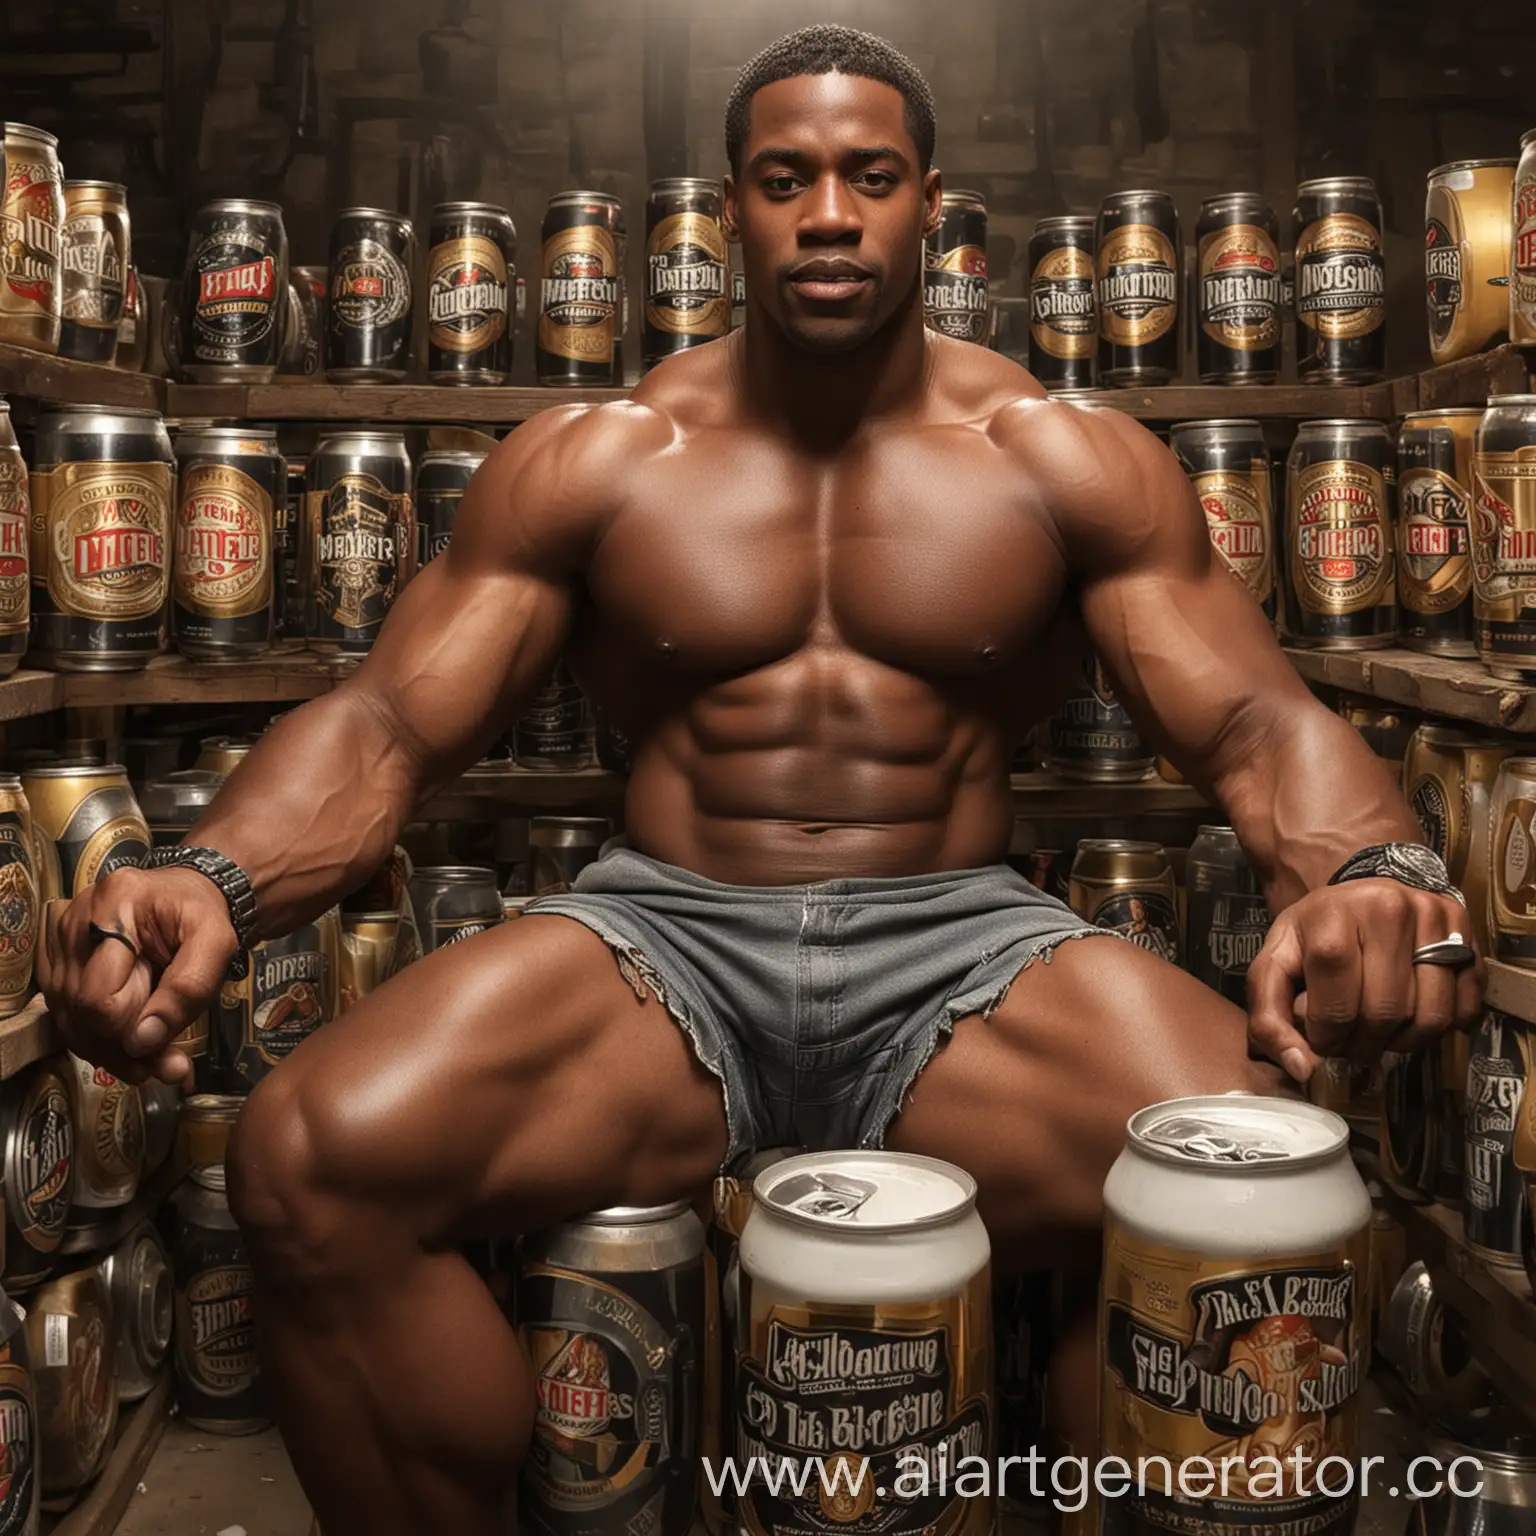 Muscular-African-American-Man-Surrounded-by-Beer-Bottles